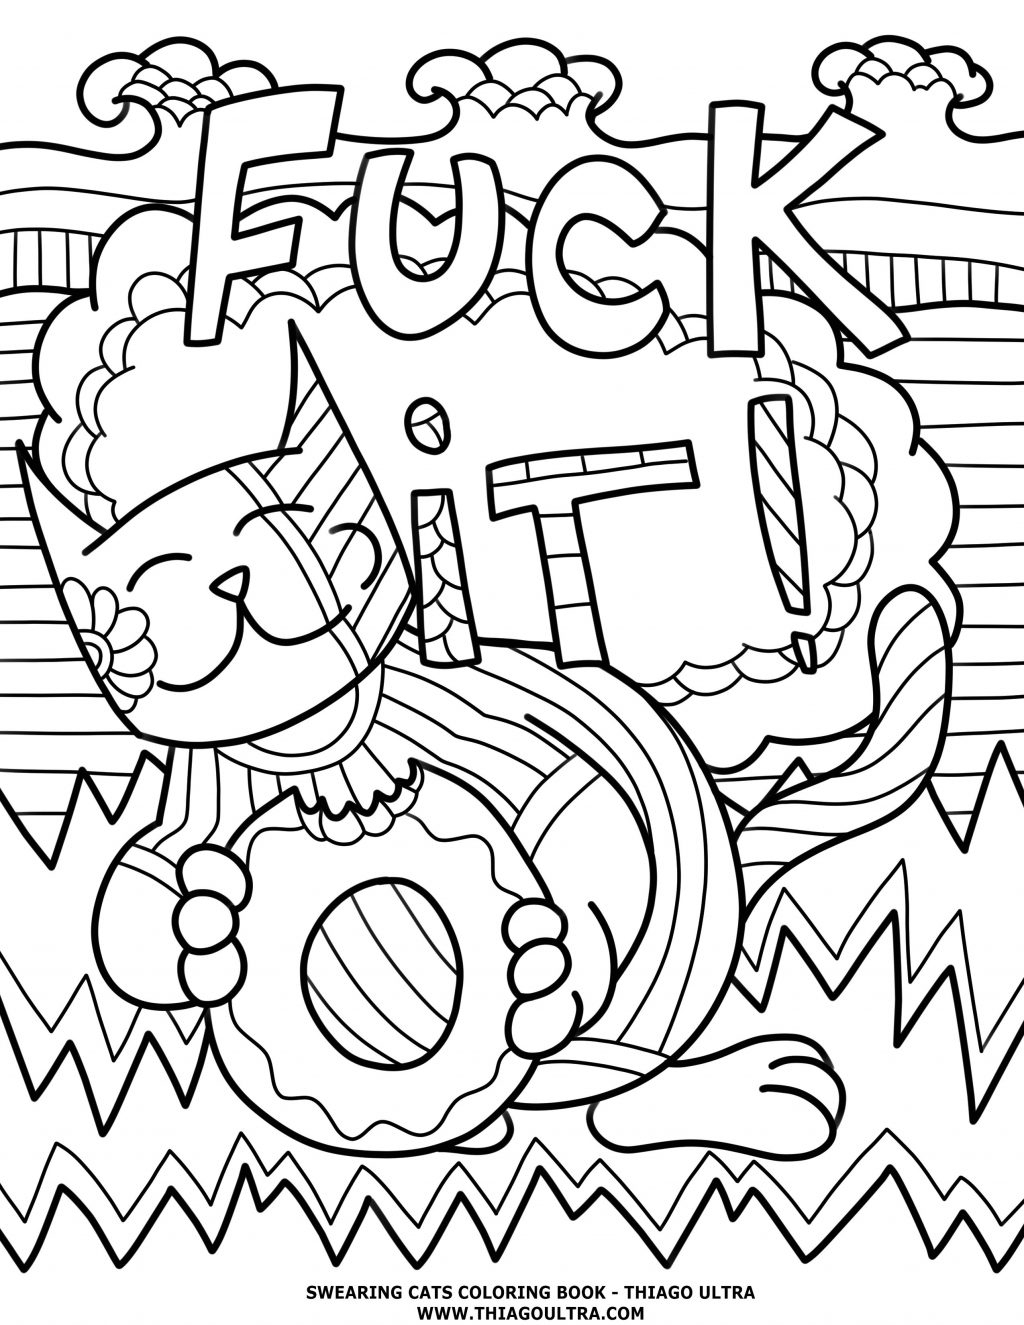 Coloring Pages ~ Free Printable Coloring Pages For Adults Swear - Free Printable Coloring Pages For Adults Swear Words